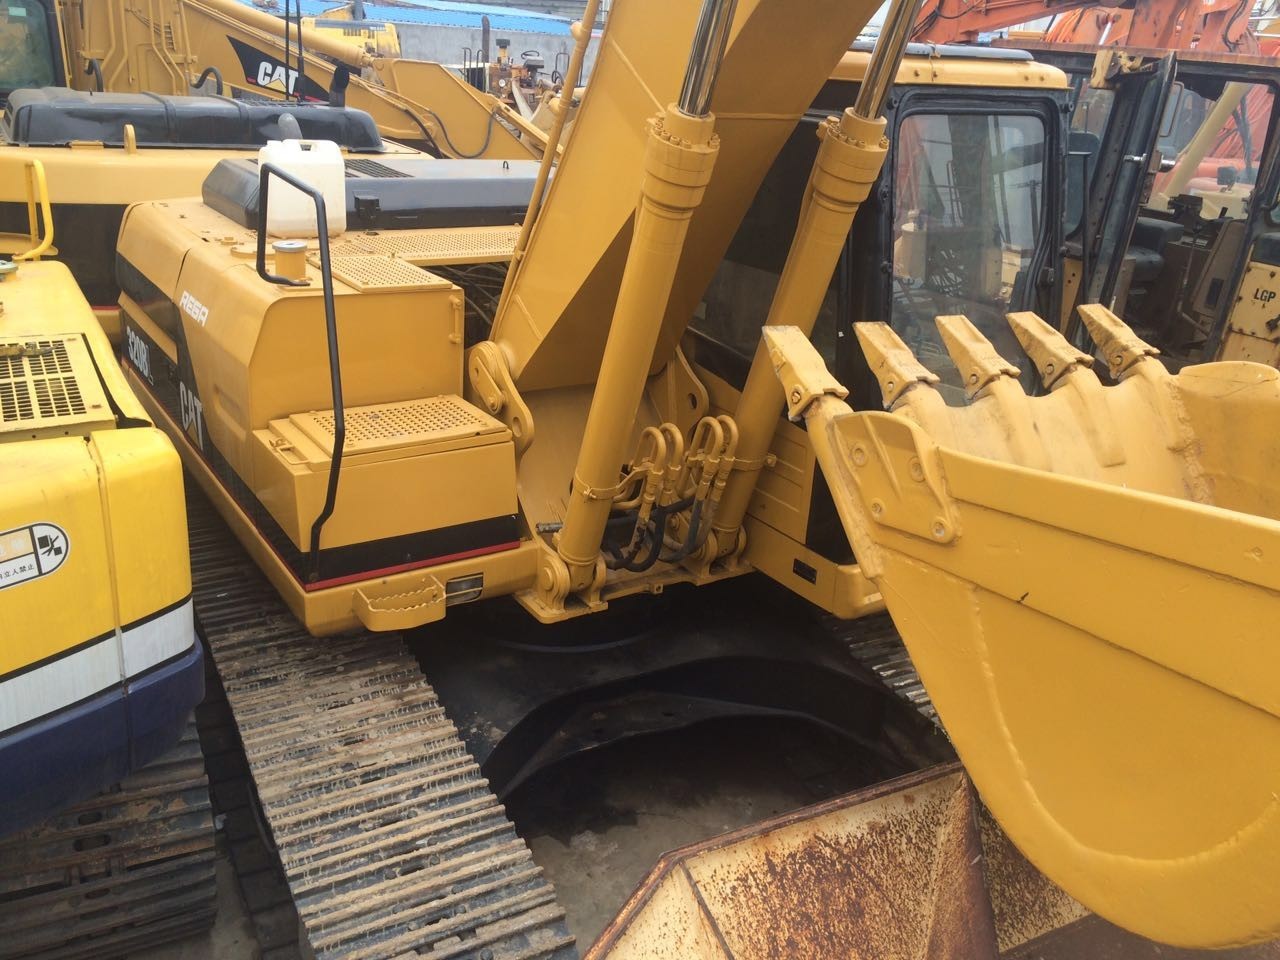 China 1999 USA $30000 made CAT 320B used excavator Caterpillar 320 excavator for sale factory